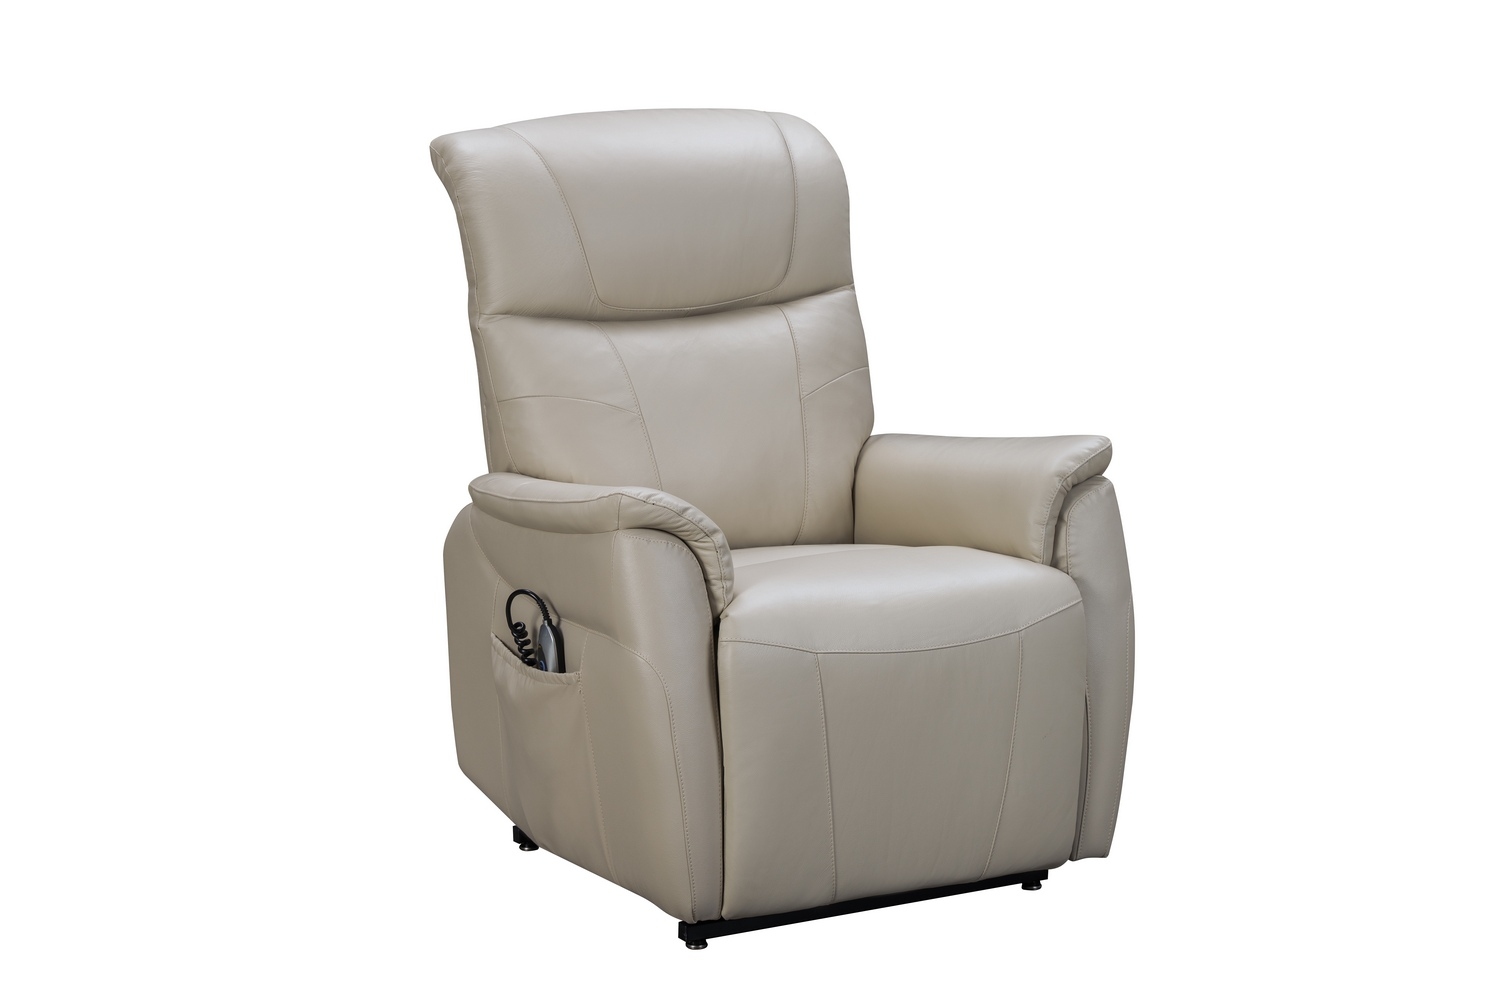 Barcalounger Leighton Lift Chair Recliner Chair with Power Head Rest, Power Lumbar and Lay Flat Mechanism - Laurel Cream/Leather Match